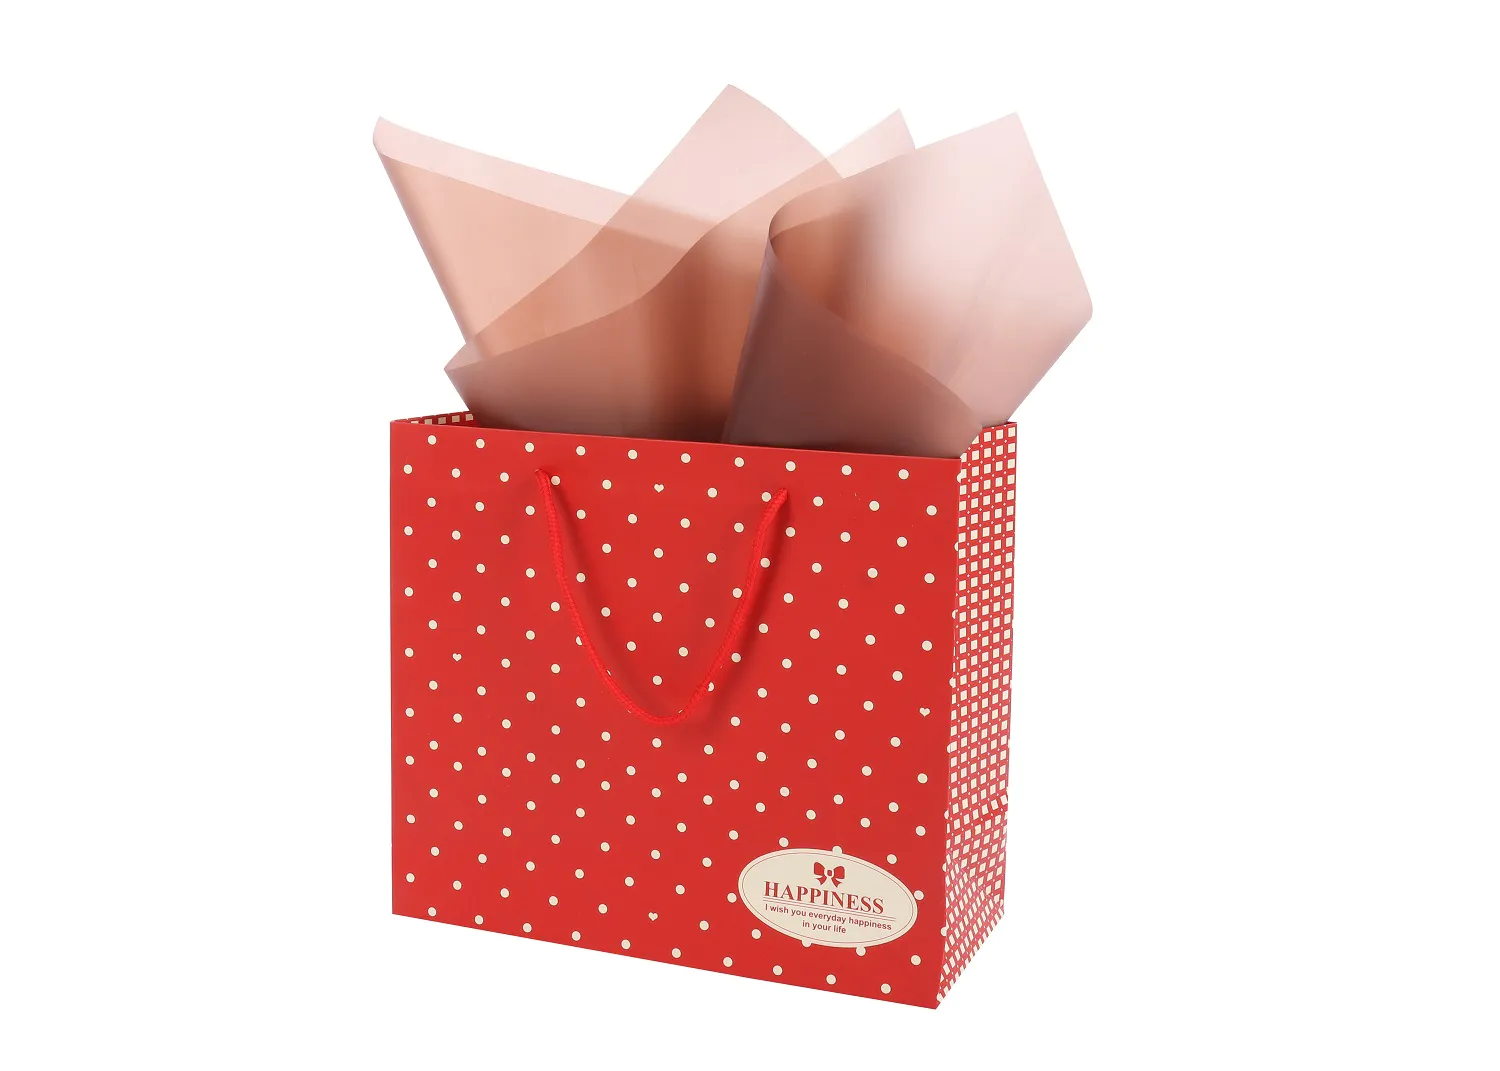 Jialan Package economical custom printed gift bags vendor for packing gifts